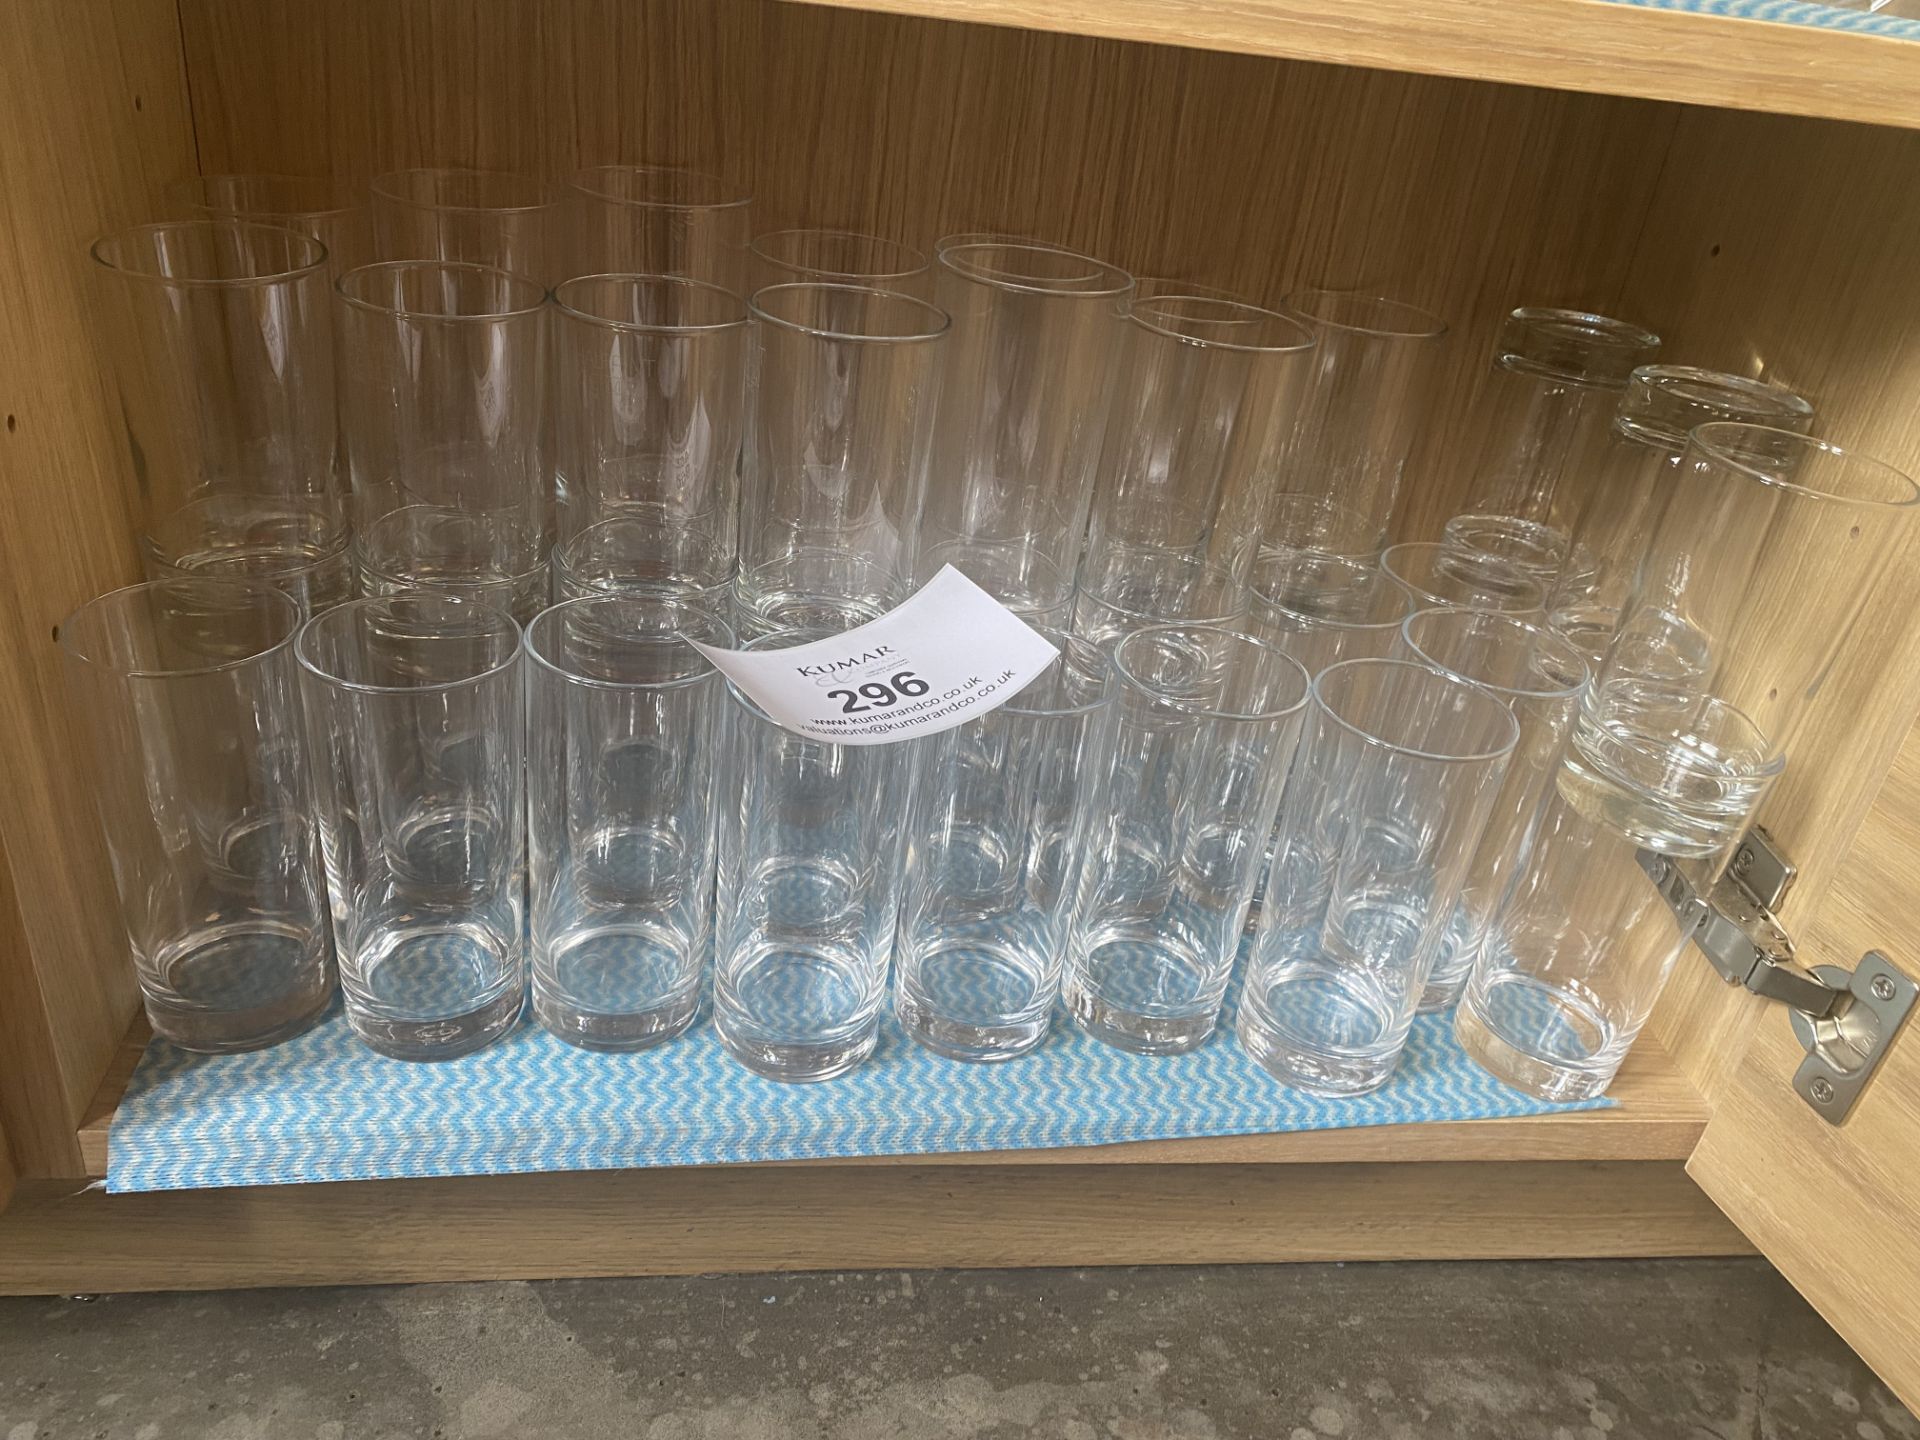 42x Tall Drinking Glasses. Please Note - This lot is located at Hengata Restaurant, 106 High Street, - Bild 3 aus 3